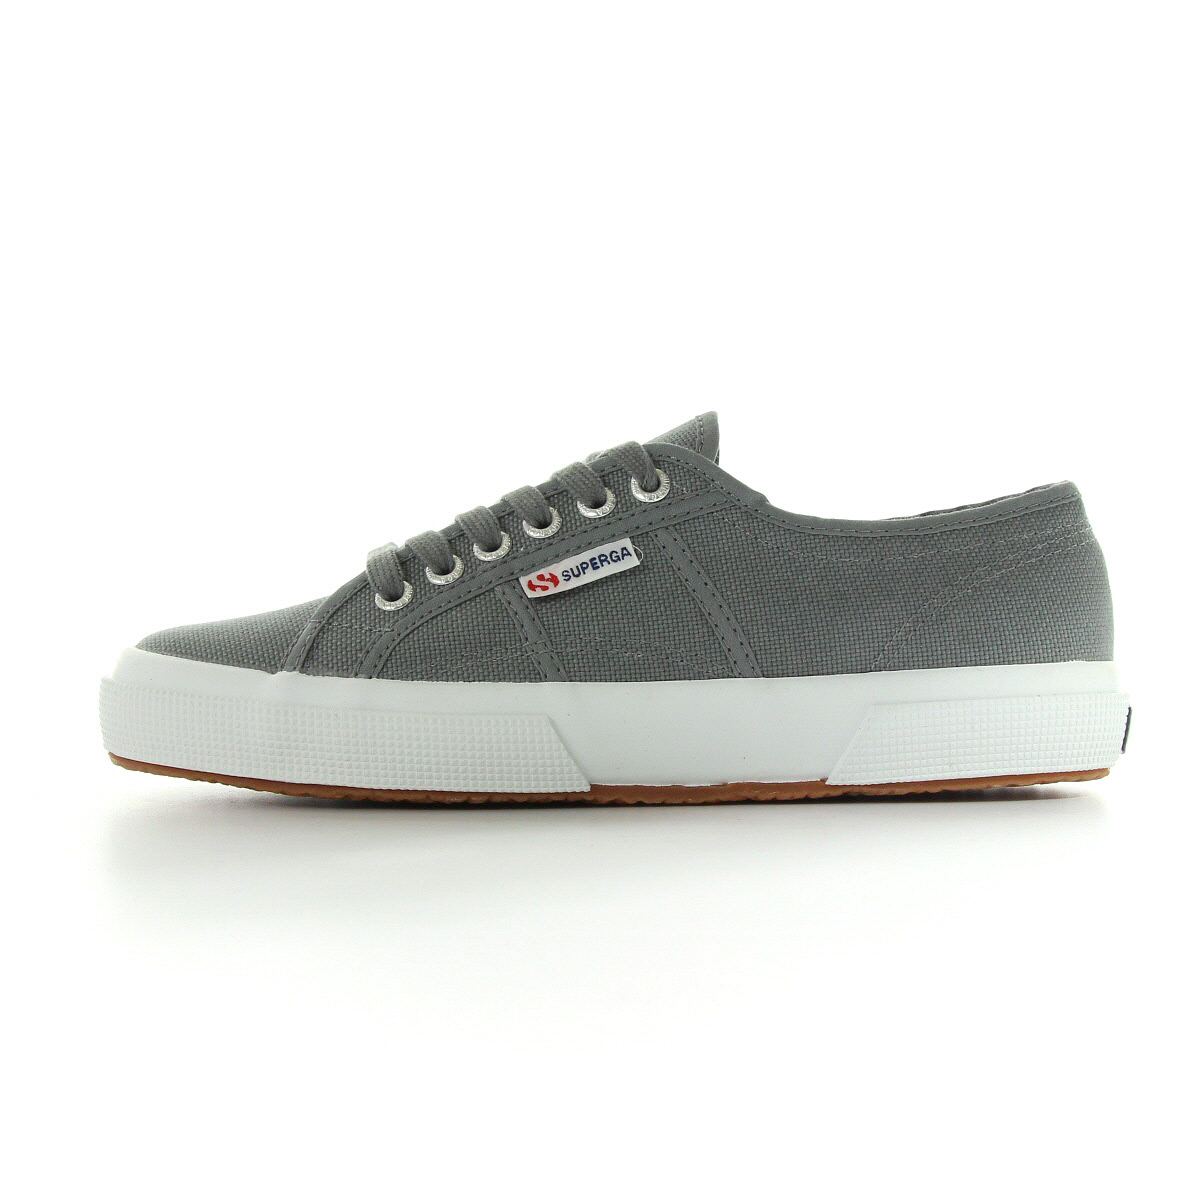 Chaussures Baskets Superga femme 2750 cotu classic taille